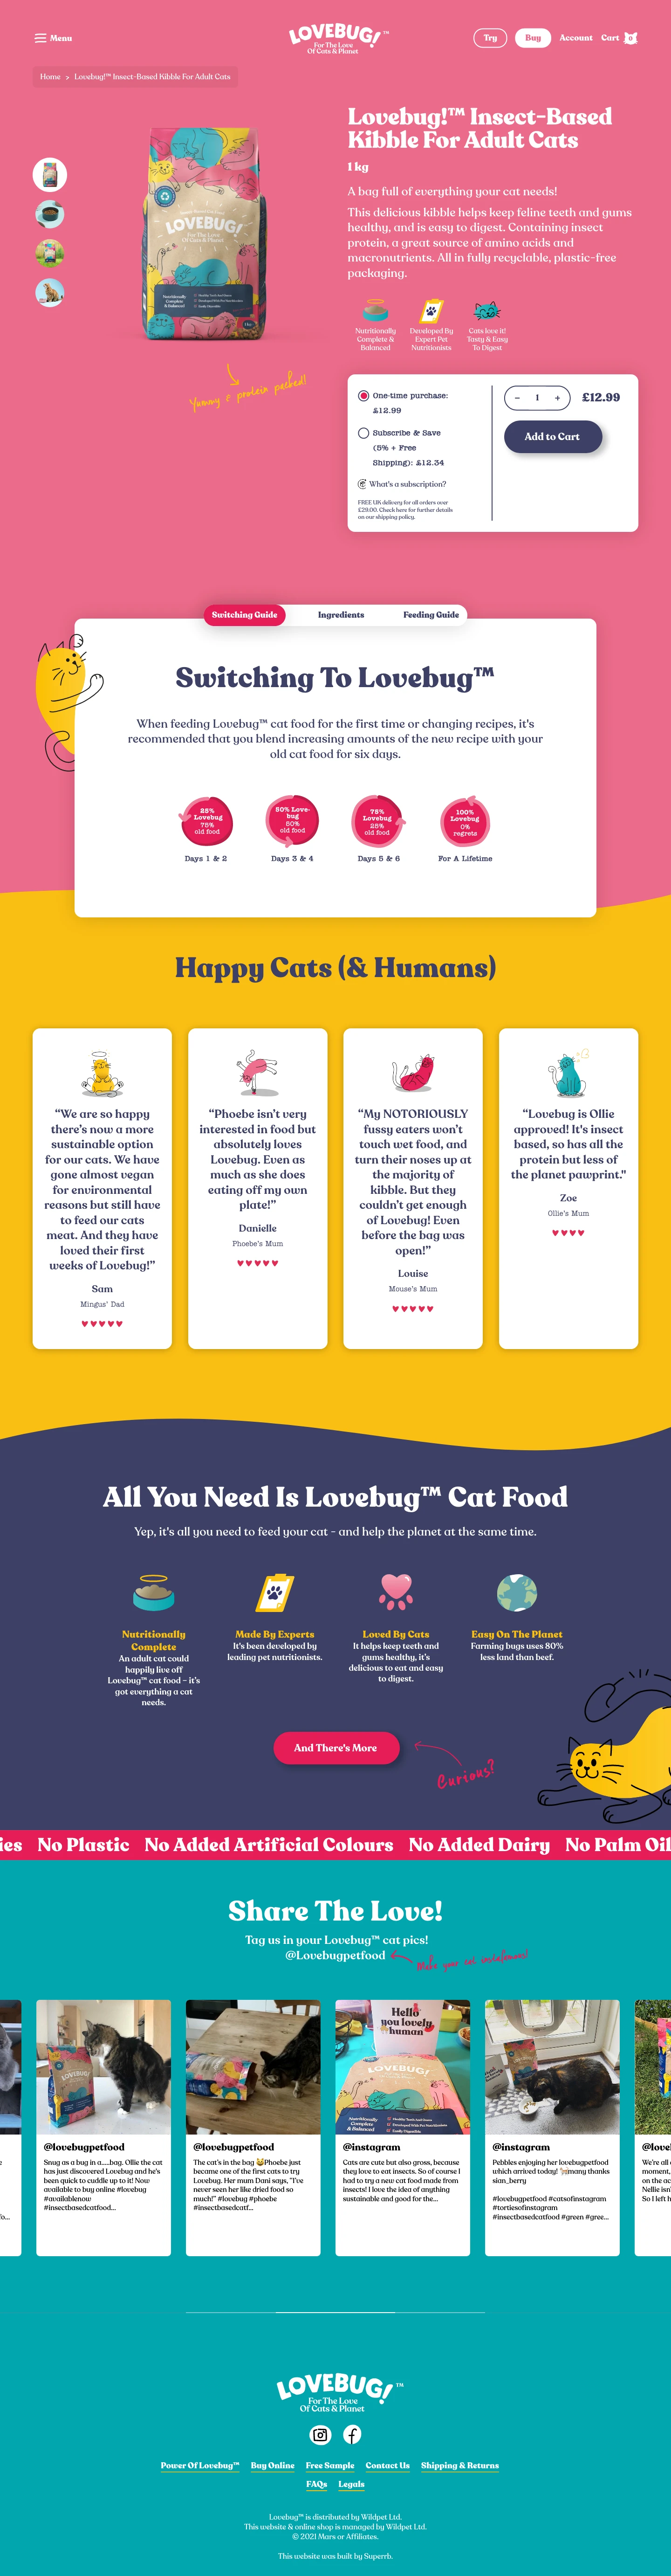 Lovebug Pet Food Landing Page Example: Lovebug is nutritionally complete and balanced cat food that helps you love your cat and your planet at the same time. It’s insect-based and cats love it.